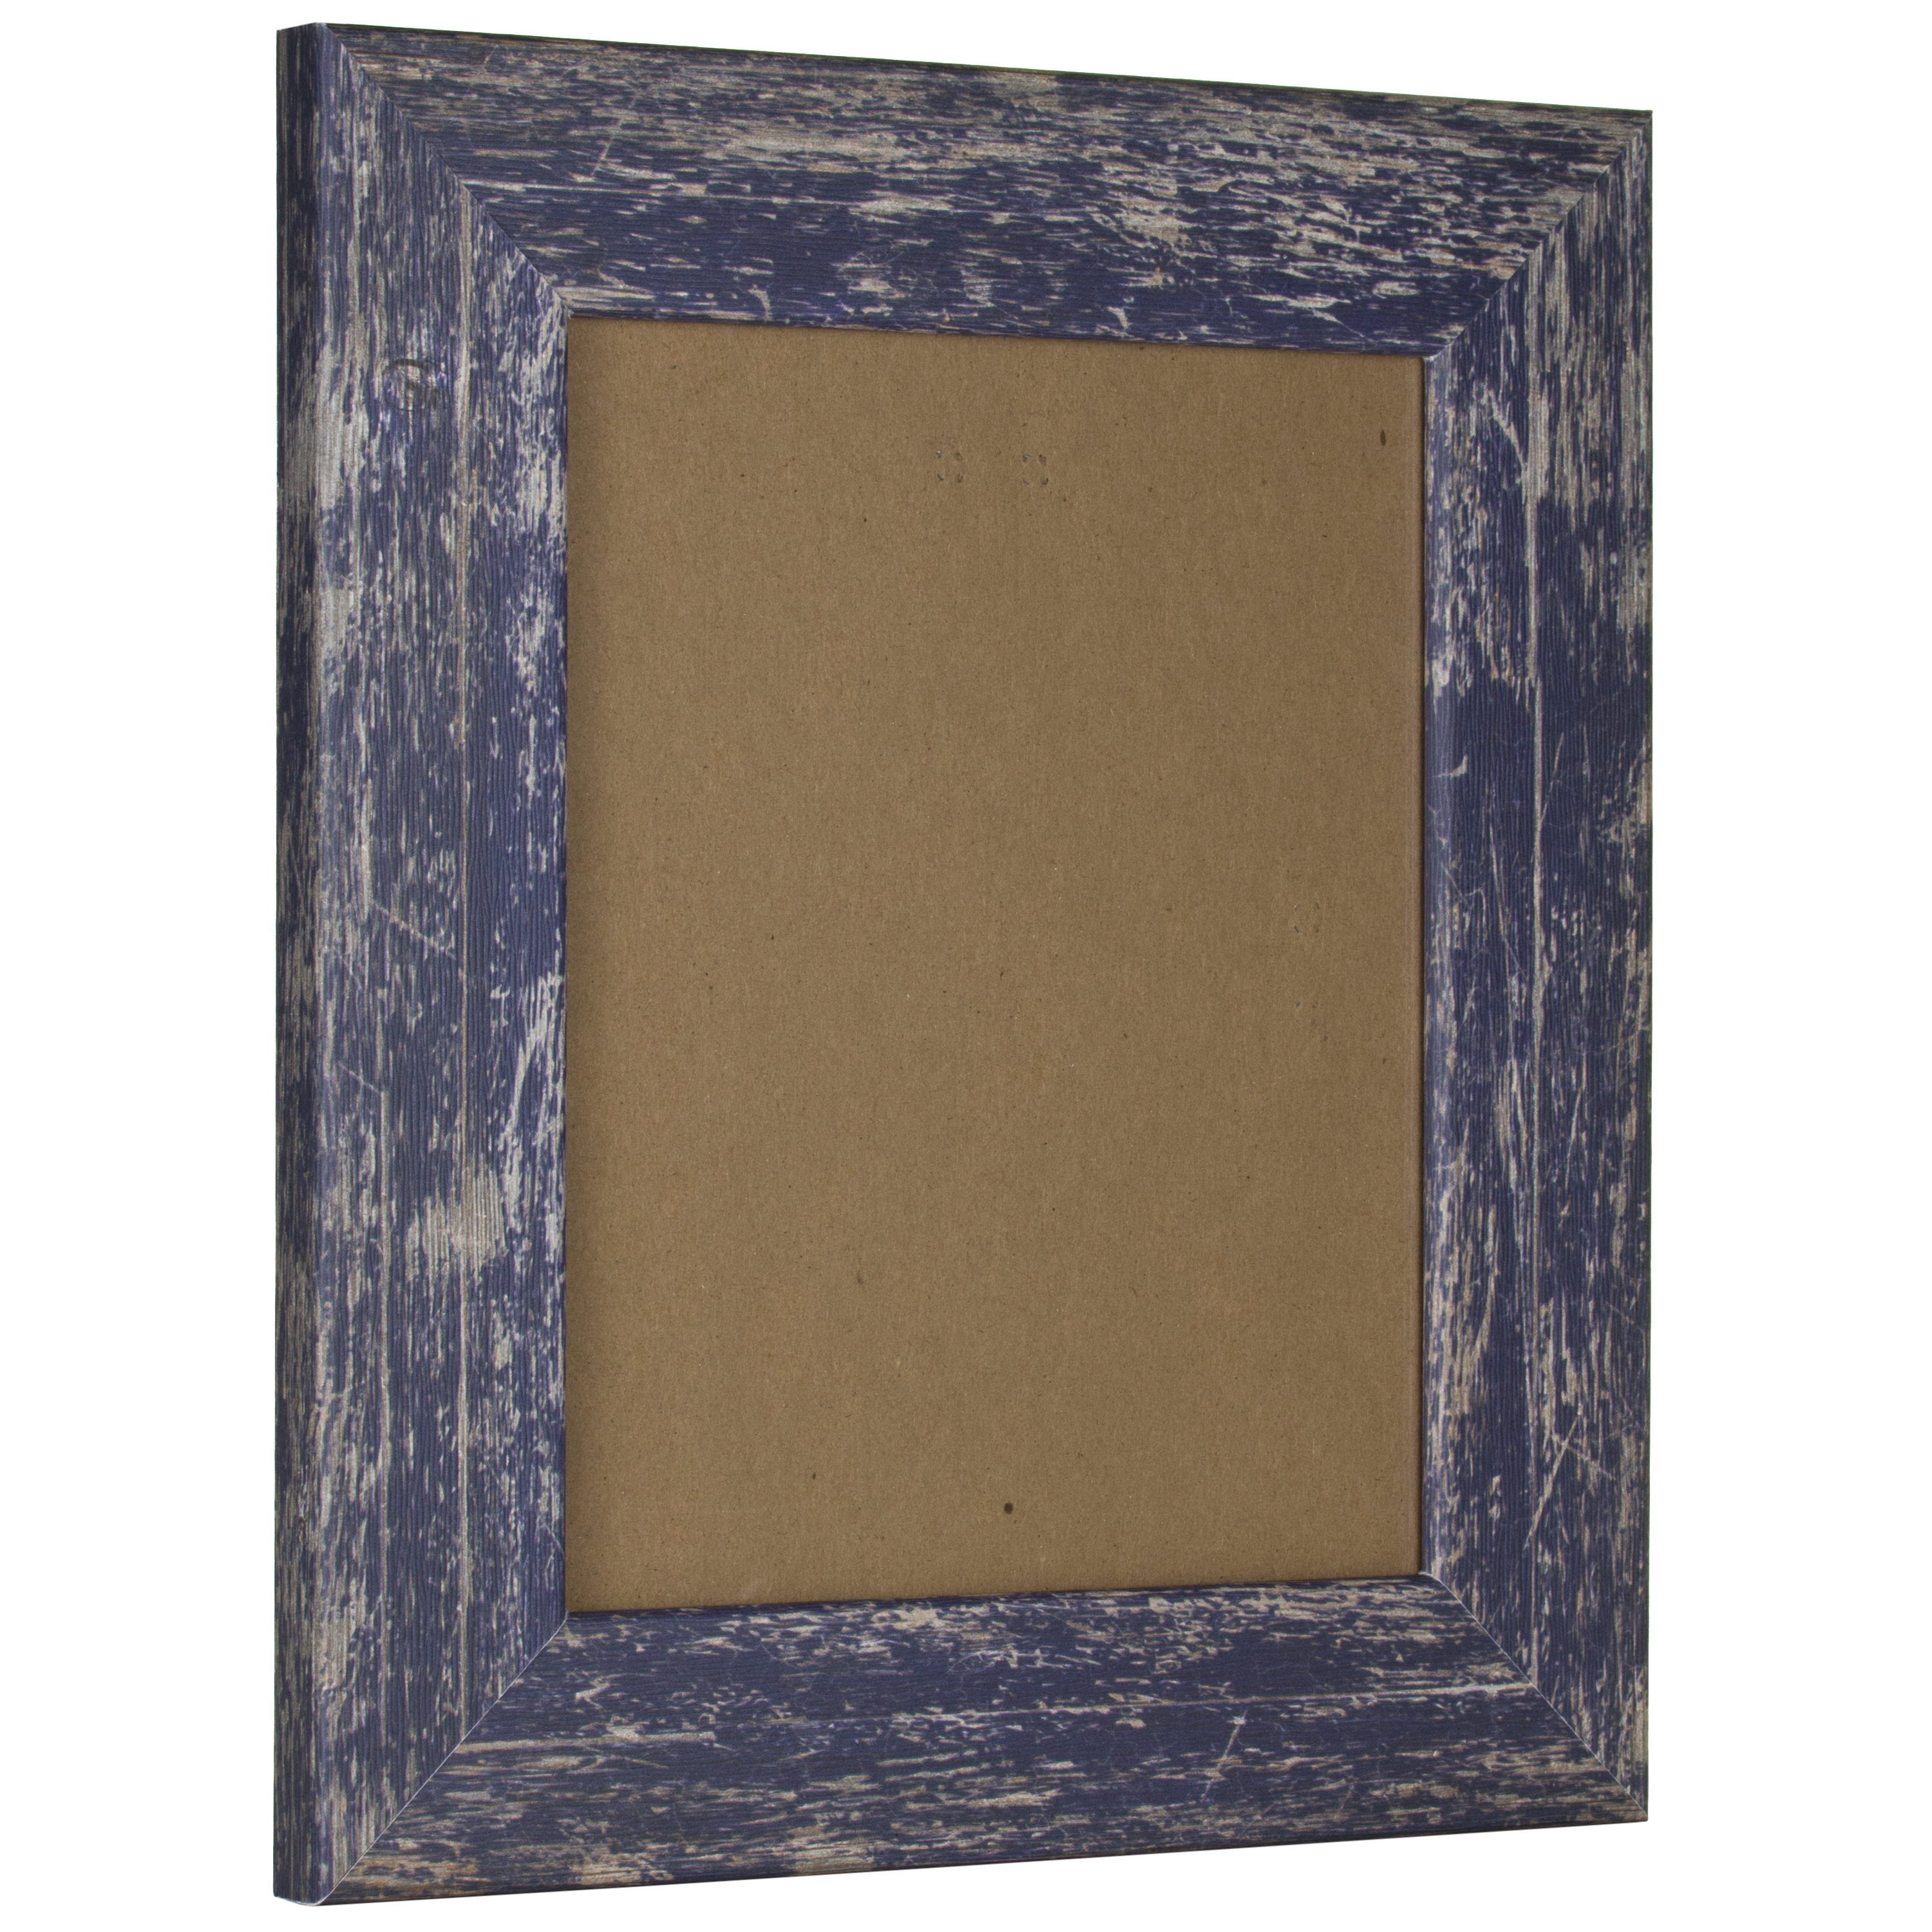 Craig Frames 7416051212 American Barn White 12x12 Inch Faux Barnwood Picture Frame 2 Wide